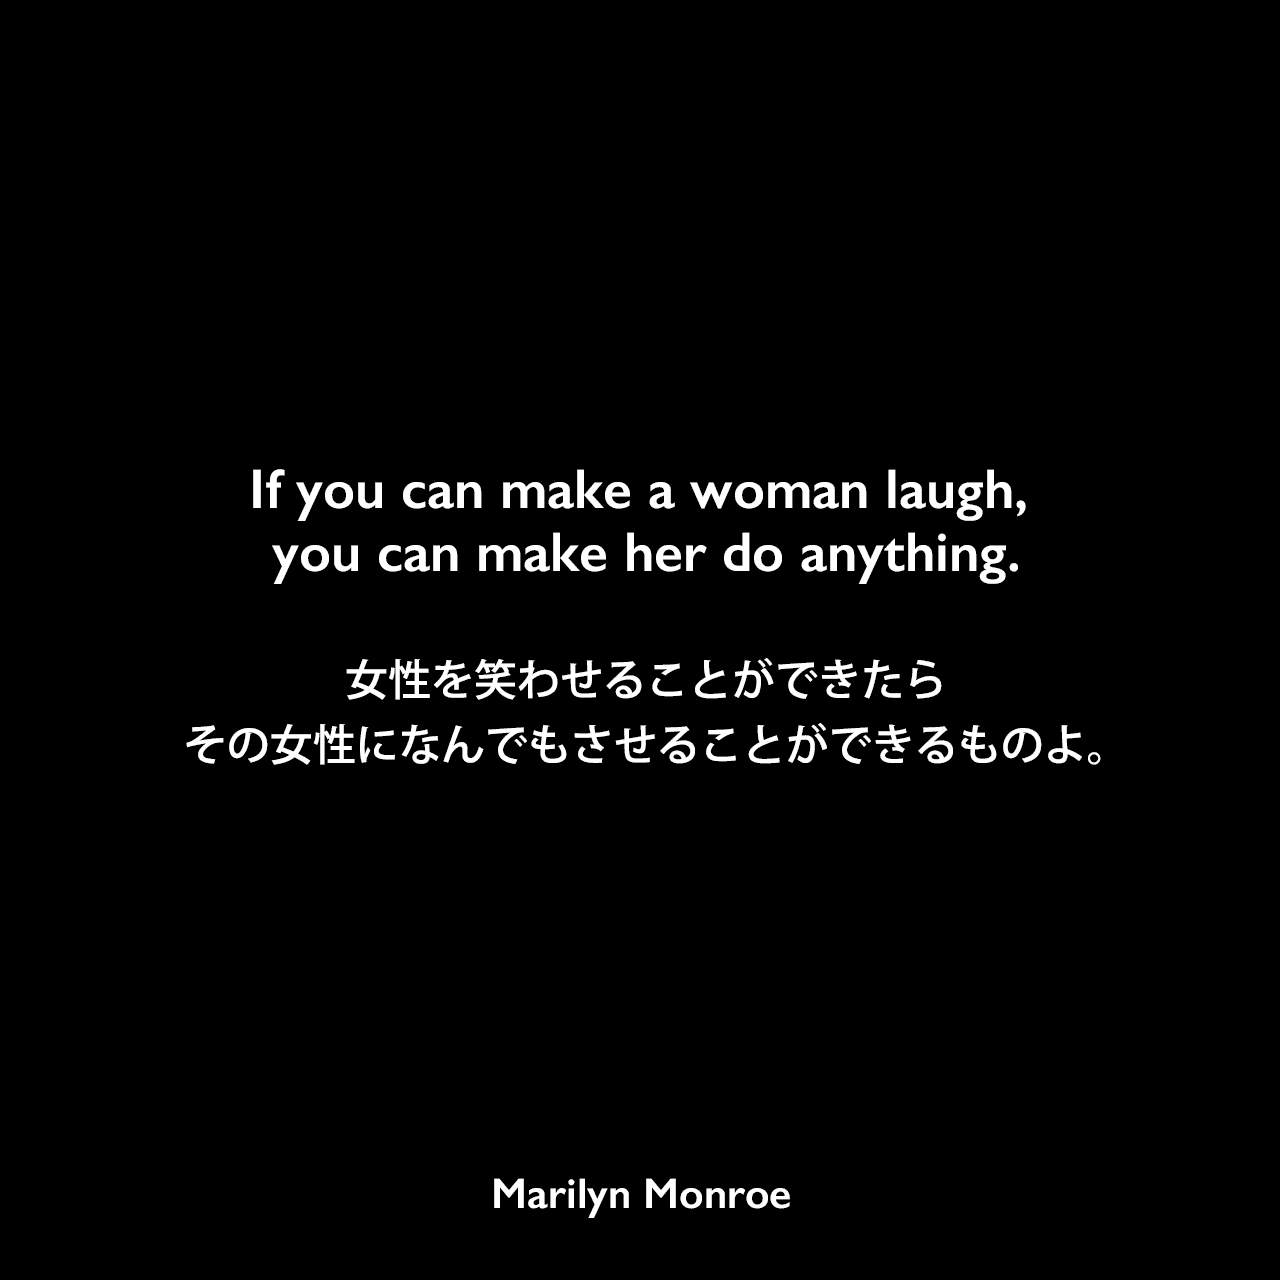 If you can make a woman laugh, you can make her do anything.女性を笑わせることができたら、その女性になんでもさせることができるものよ。Marilyn Monroe